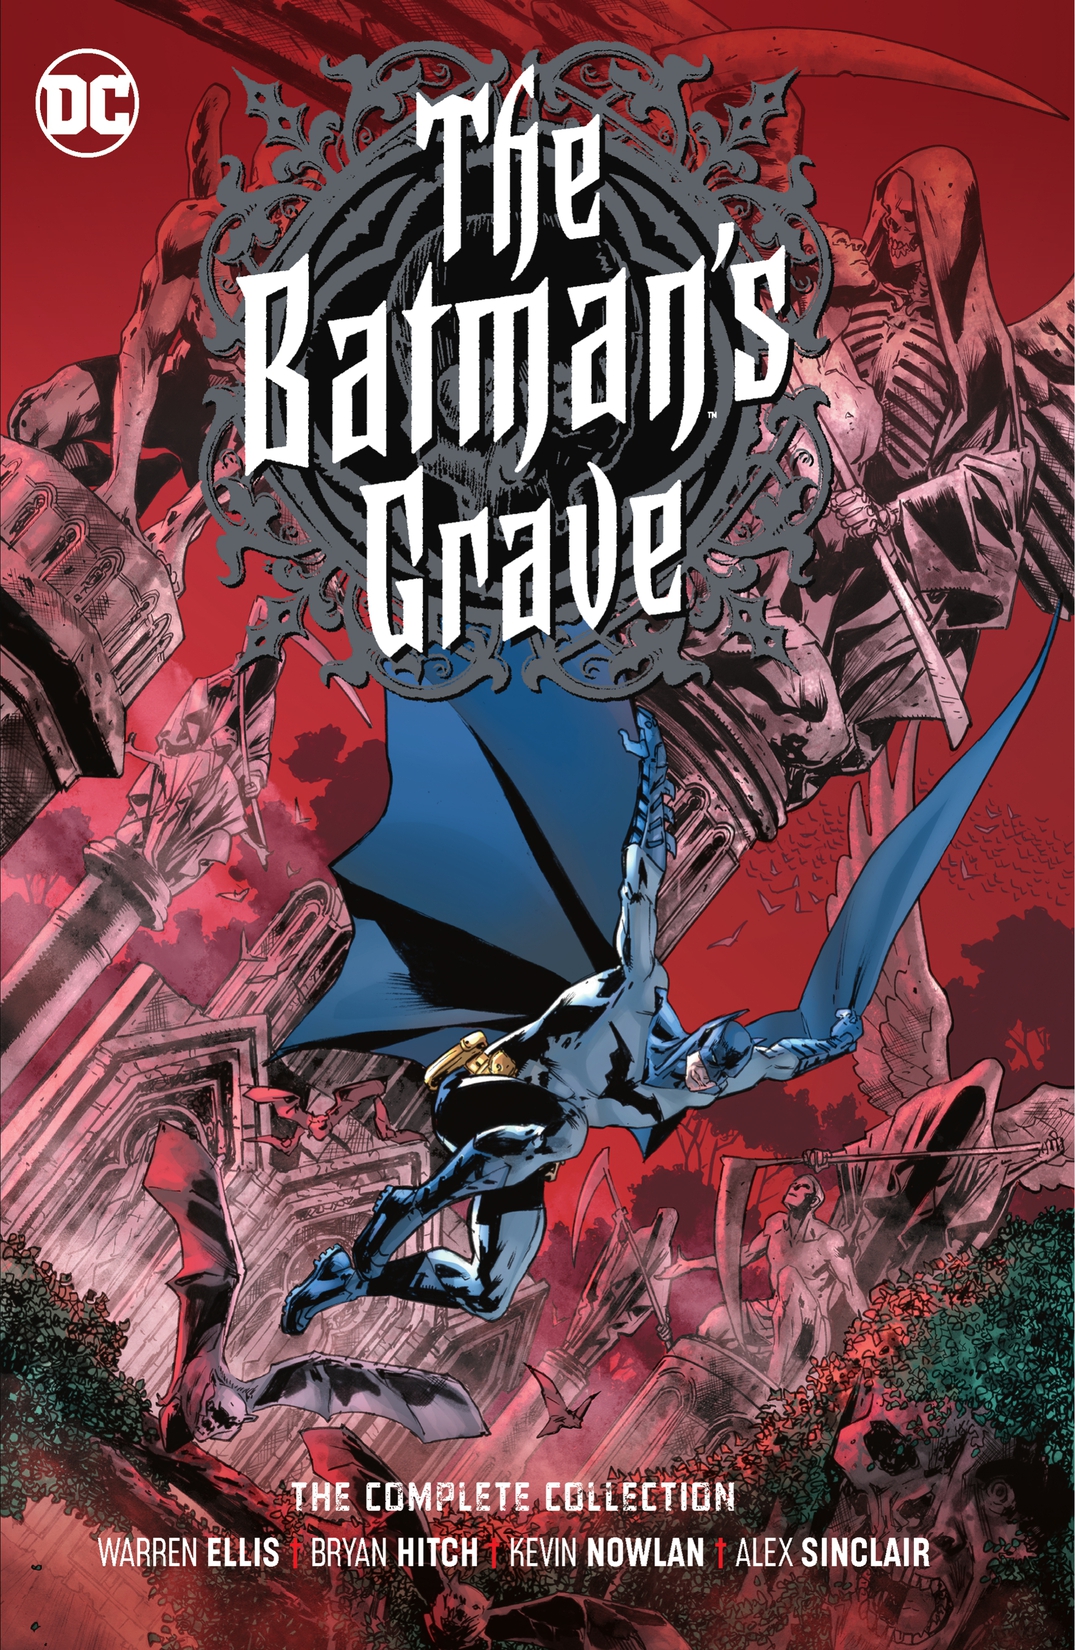 The Batman's Grave: The Complete Collection preview images